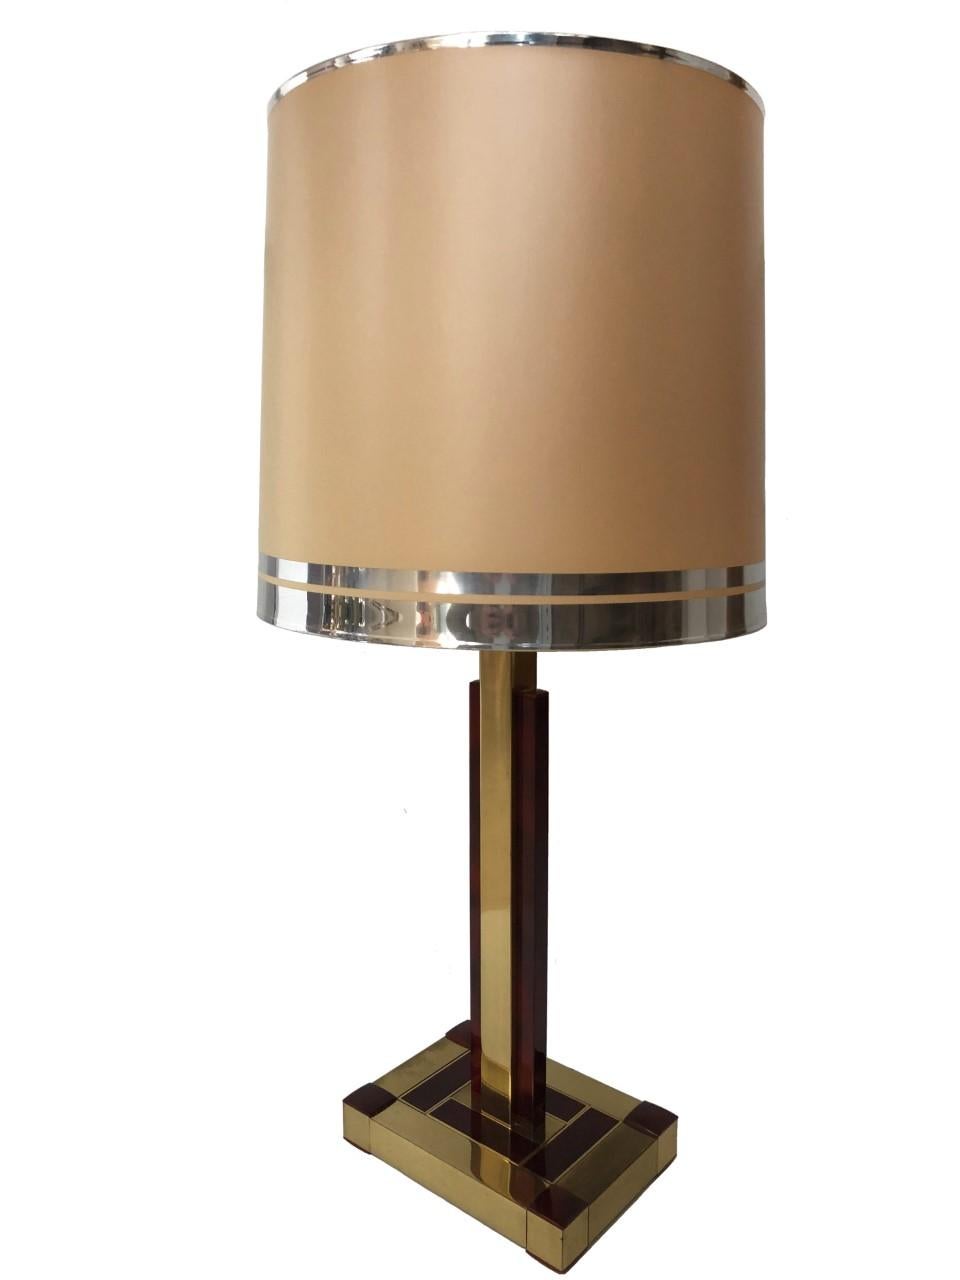 Brass and Tortoiseshell Table Lamp by Willy Rizzo for Lumica, 1970s For Sale 1